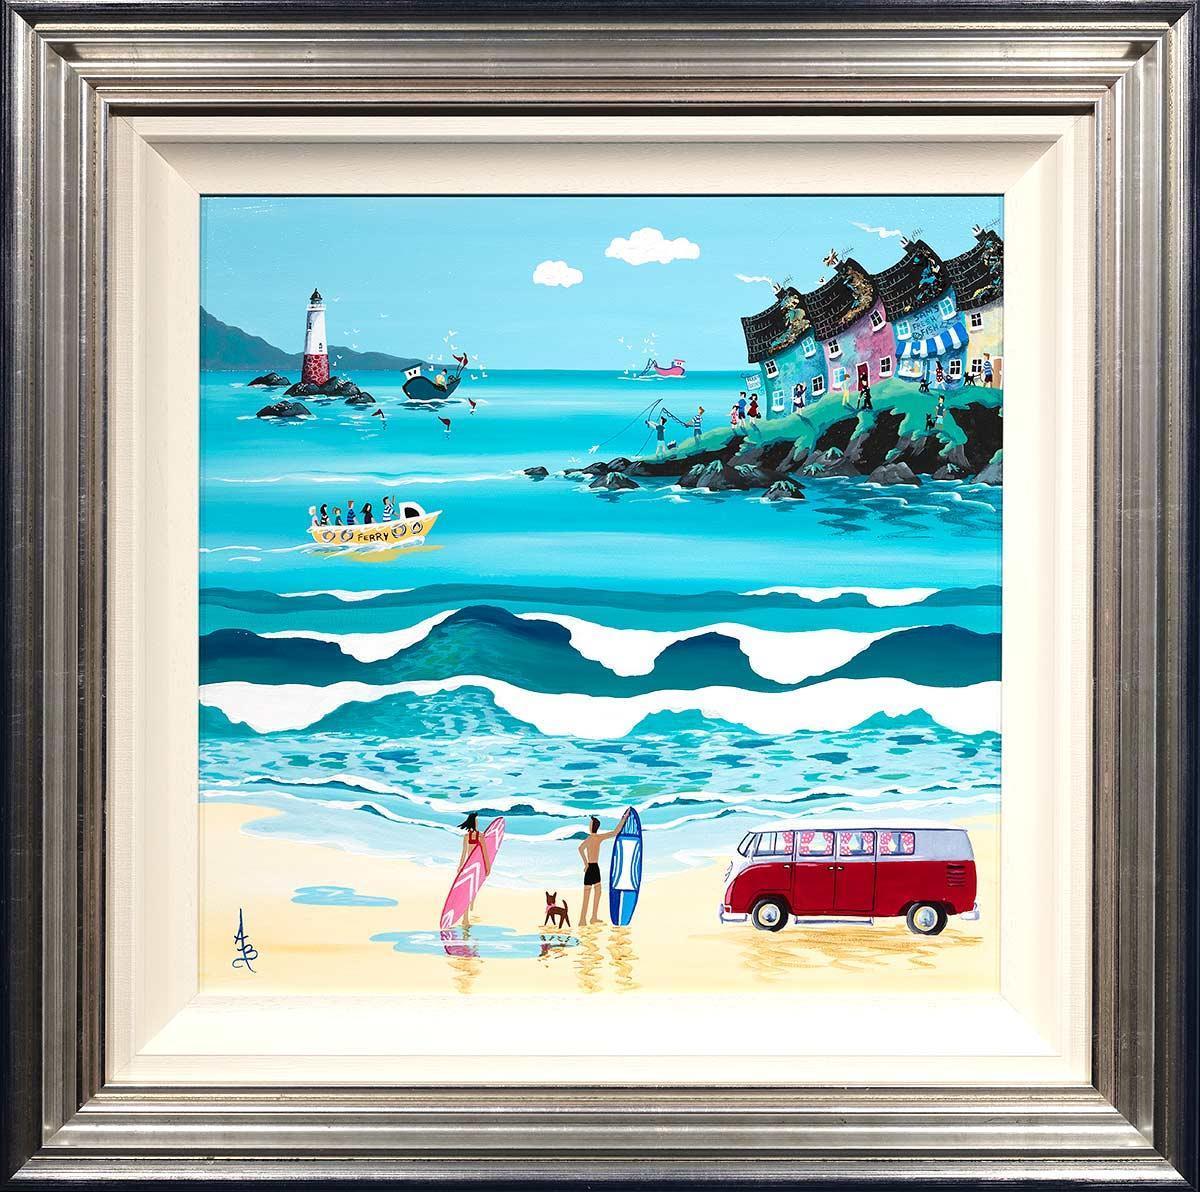 Great Day For A Surf - Original Anne Blundell